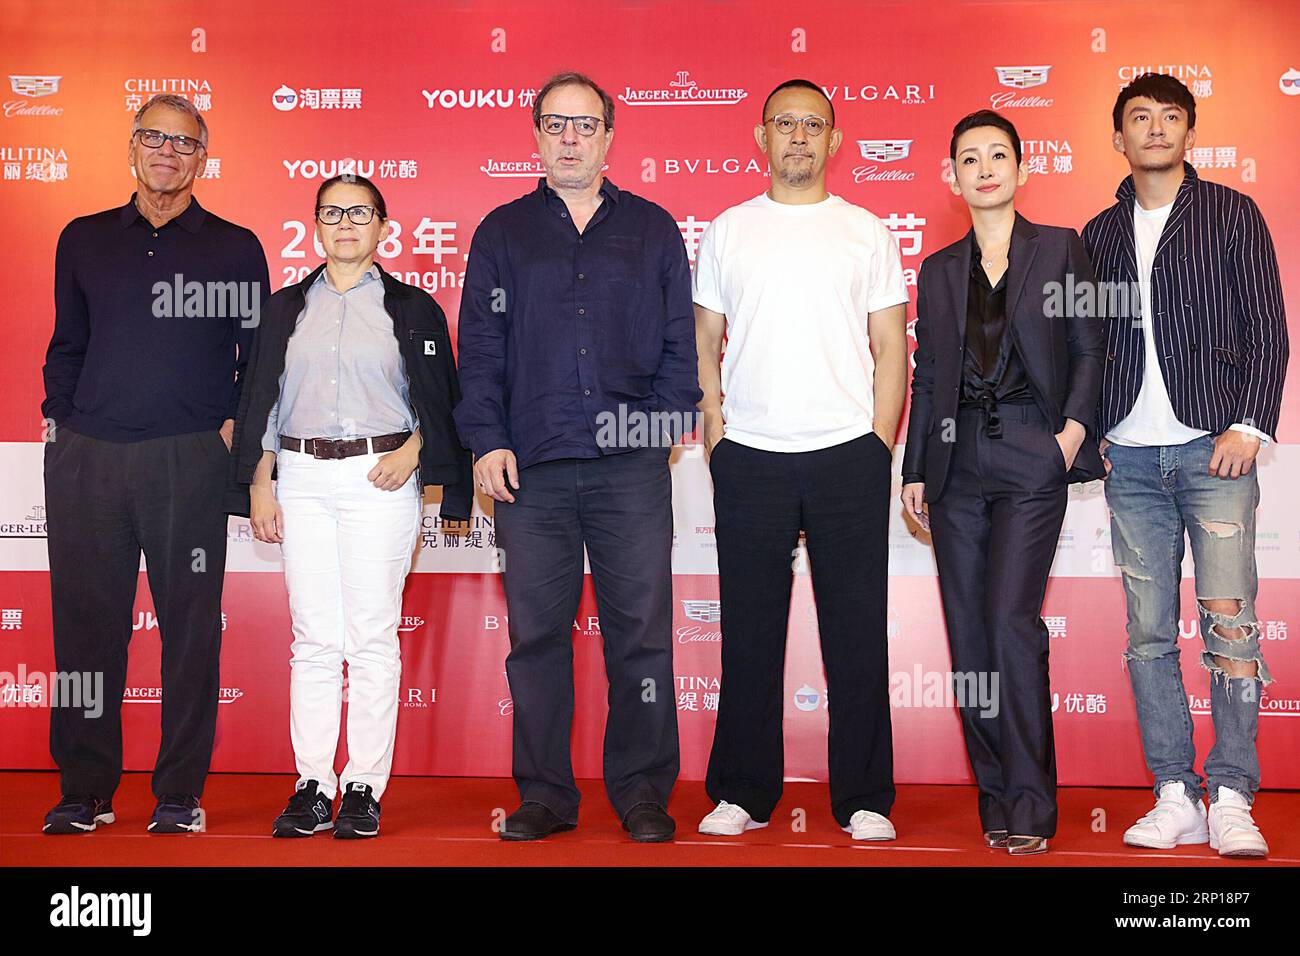 (180617) -- SHANGHAI, June 17, 2018 -- Jury for the 21st SIFF Golden Goblet Awards Jiang Wen (3rd R), Semih Kaplanoglu (3rd L), Chang Chen (1st R), David Permut (1st L), Qin Hailu (2nd R), and Ildiko Enyedi (2nd L) attend a press conference during the Shanghai International Film Festival (SIFF) in Shanghai, east China, June 17, 2018. ) (zwx) CHINA-SHANGHAI-SIFF-JURY-PRESS CONFERENCE (CN) ZhuxLiangcheng PUBLICATIONxNOTxINxCHN Stock Photo